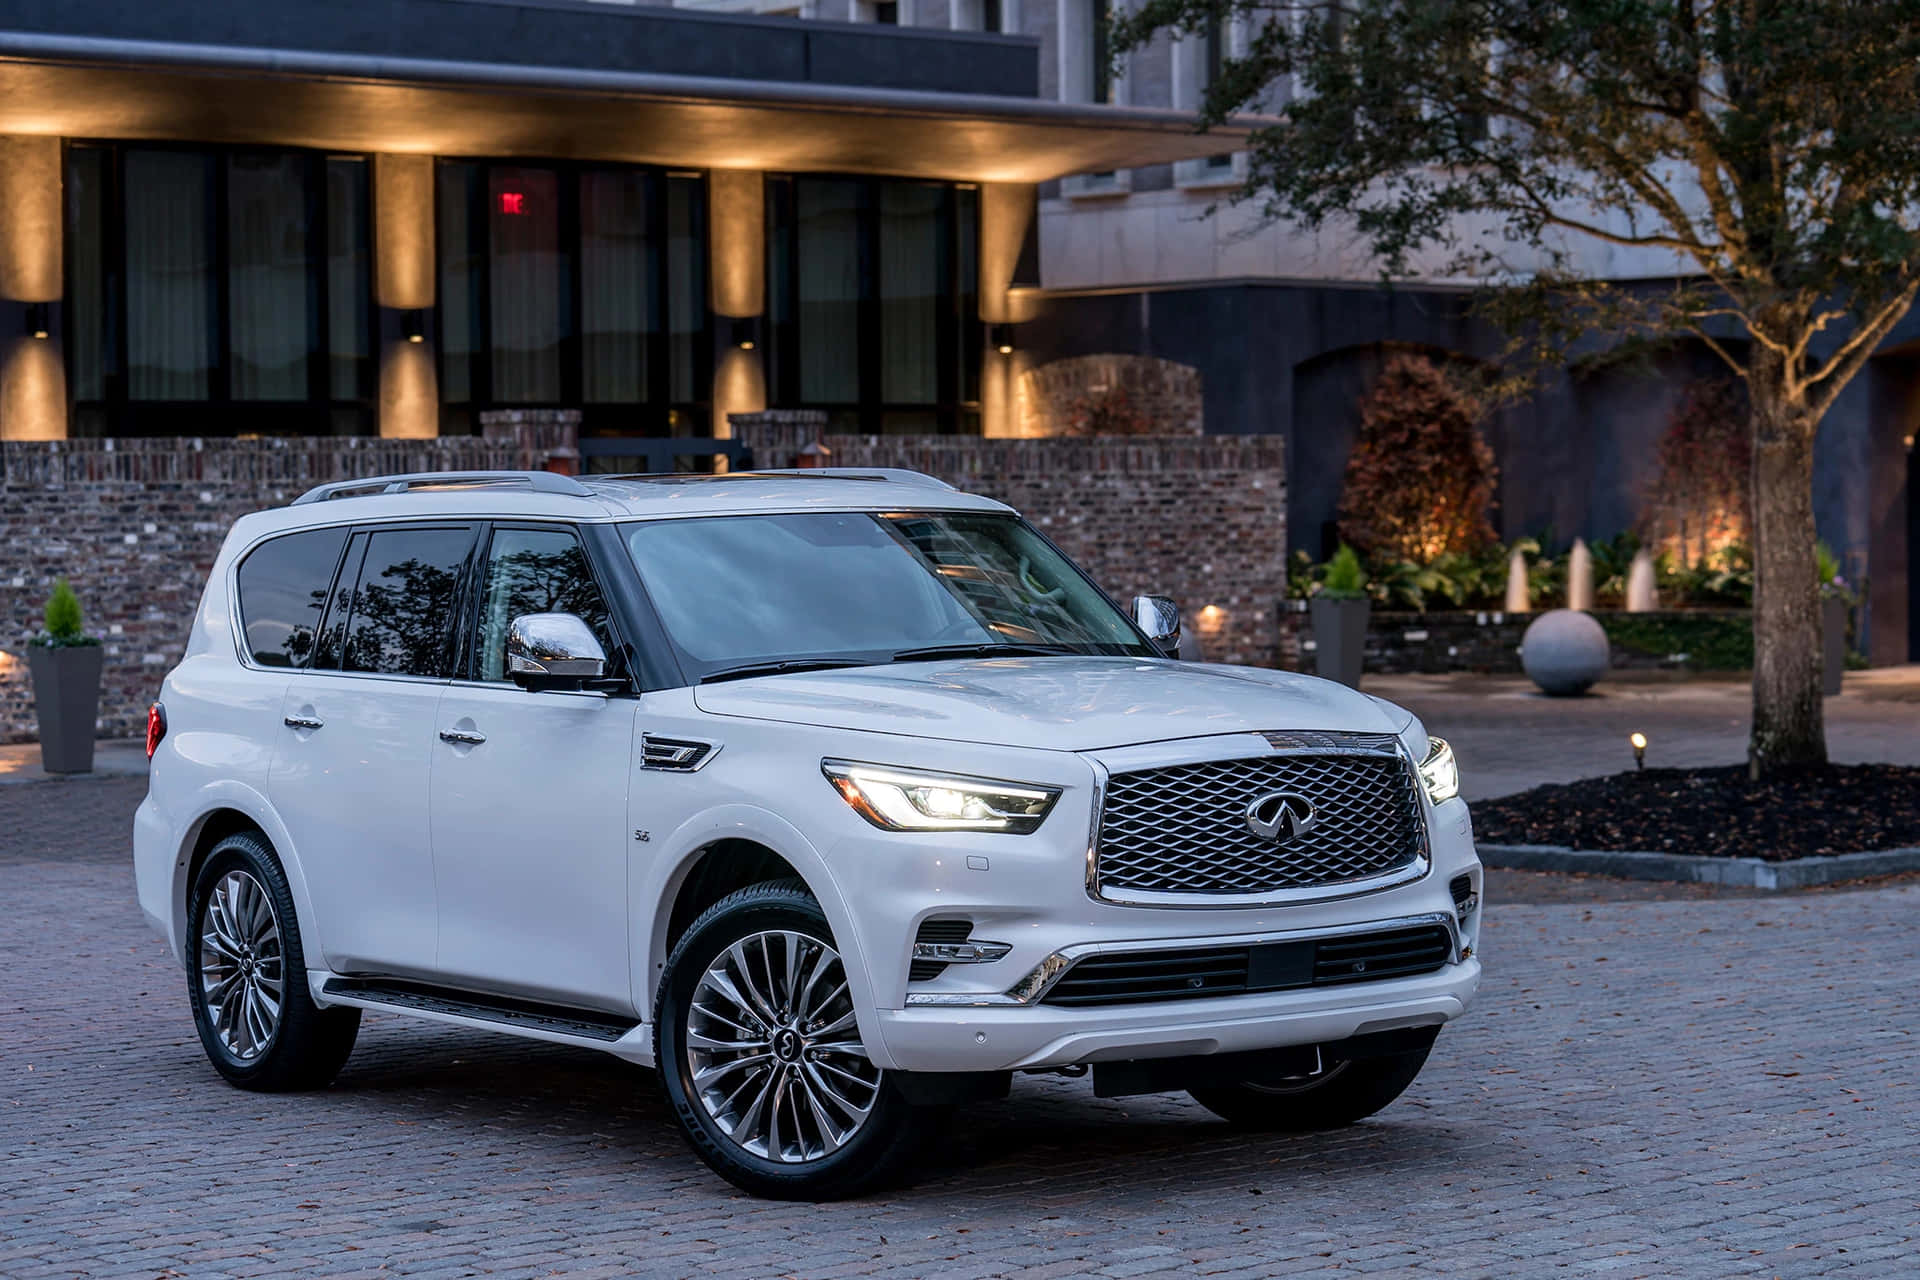 Infiniti QX80 on the road in the countryside Wallpaper